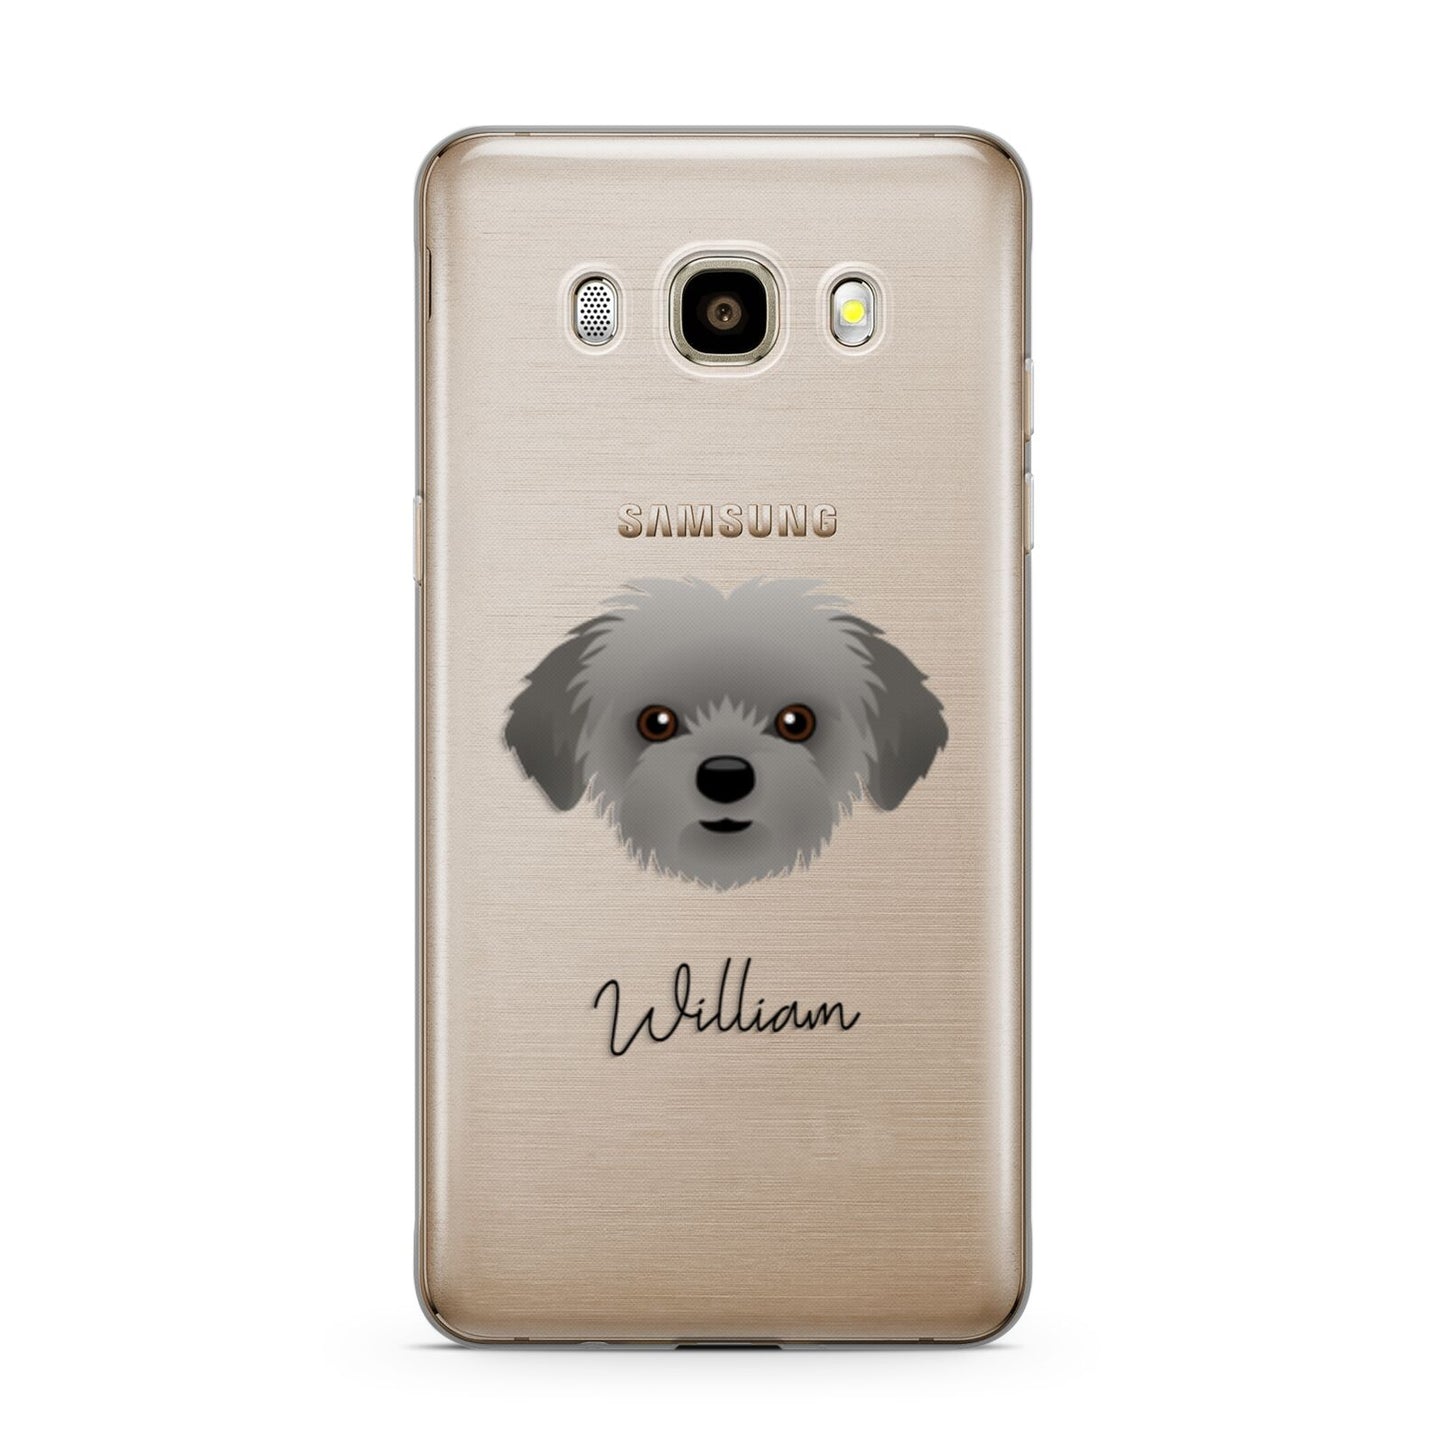 Shorkie Personalised Samsung Galaxy J7 2016 Case on gold phone